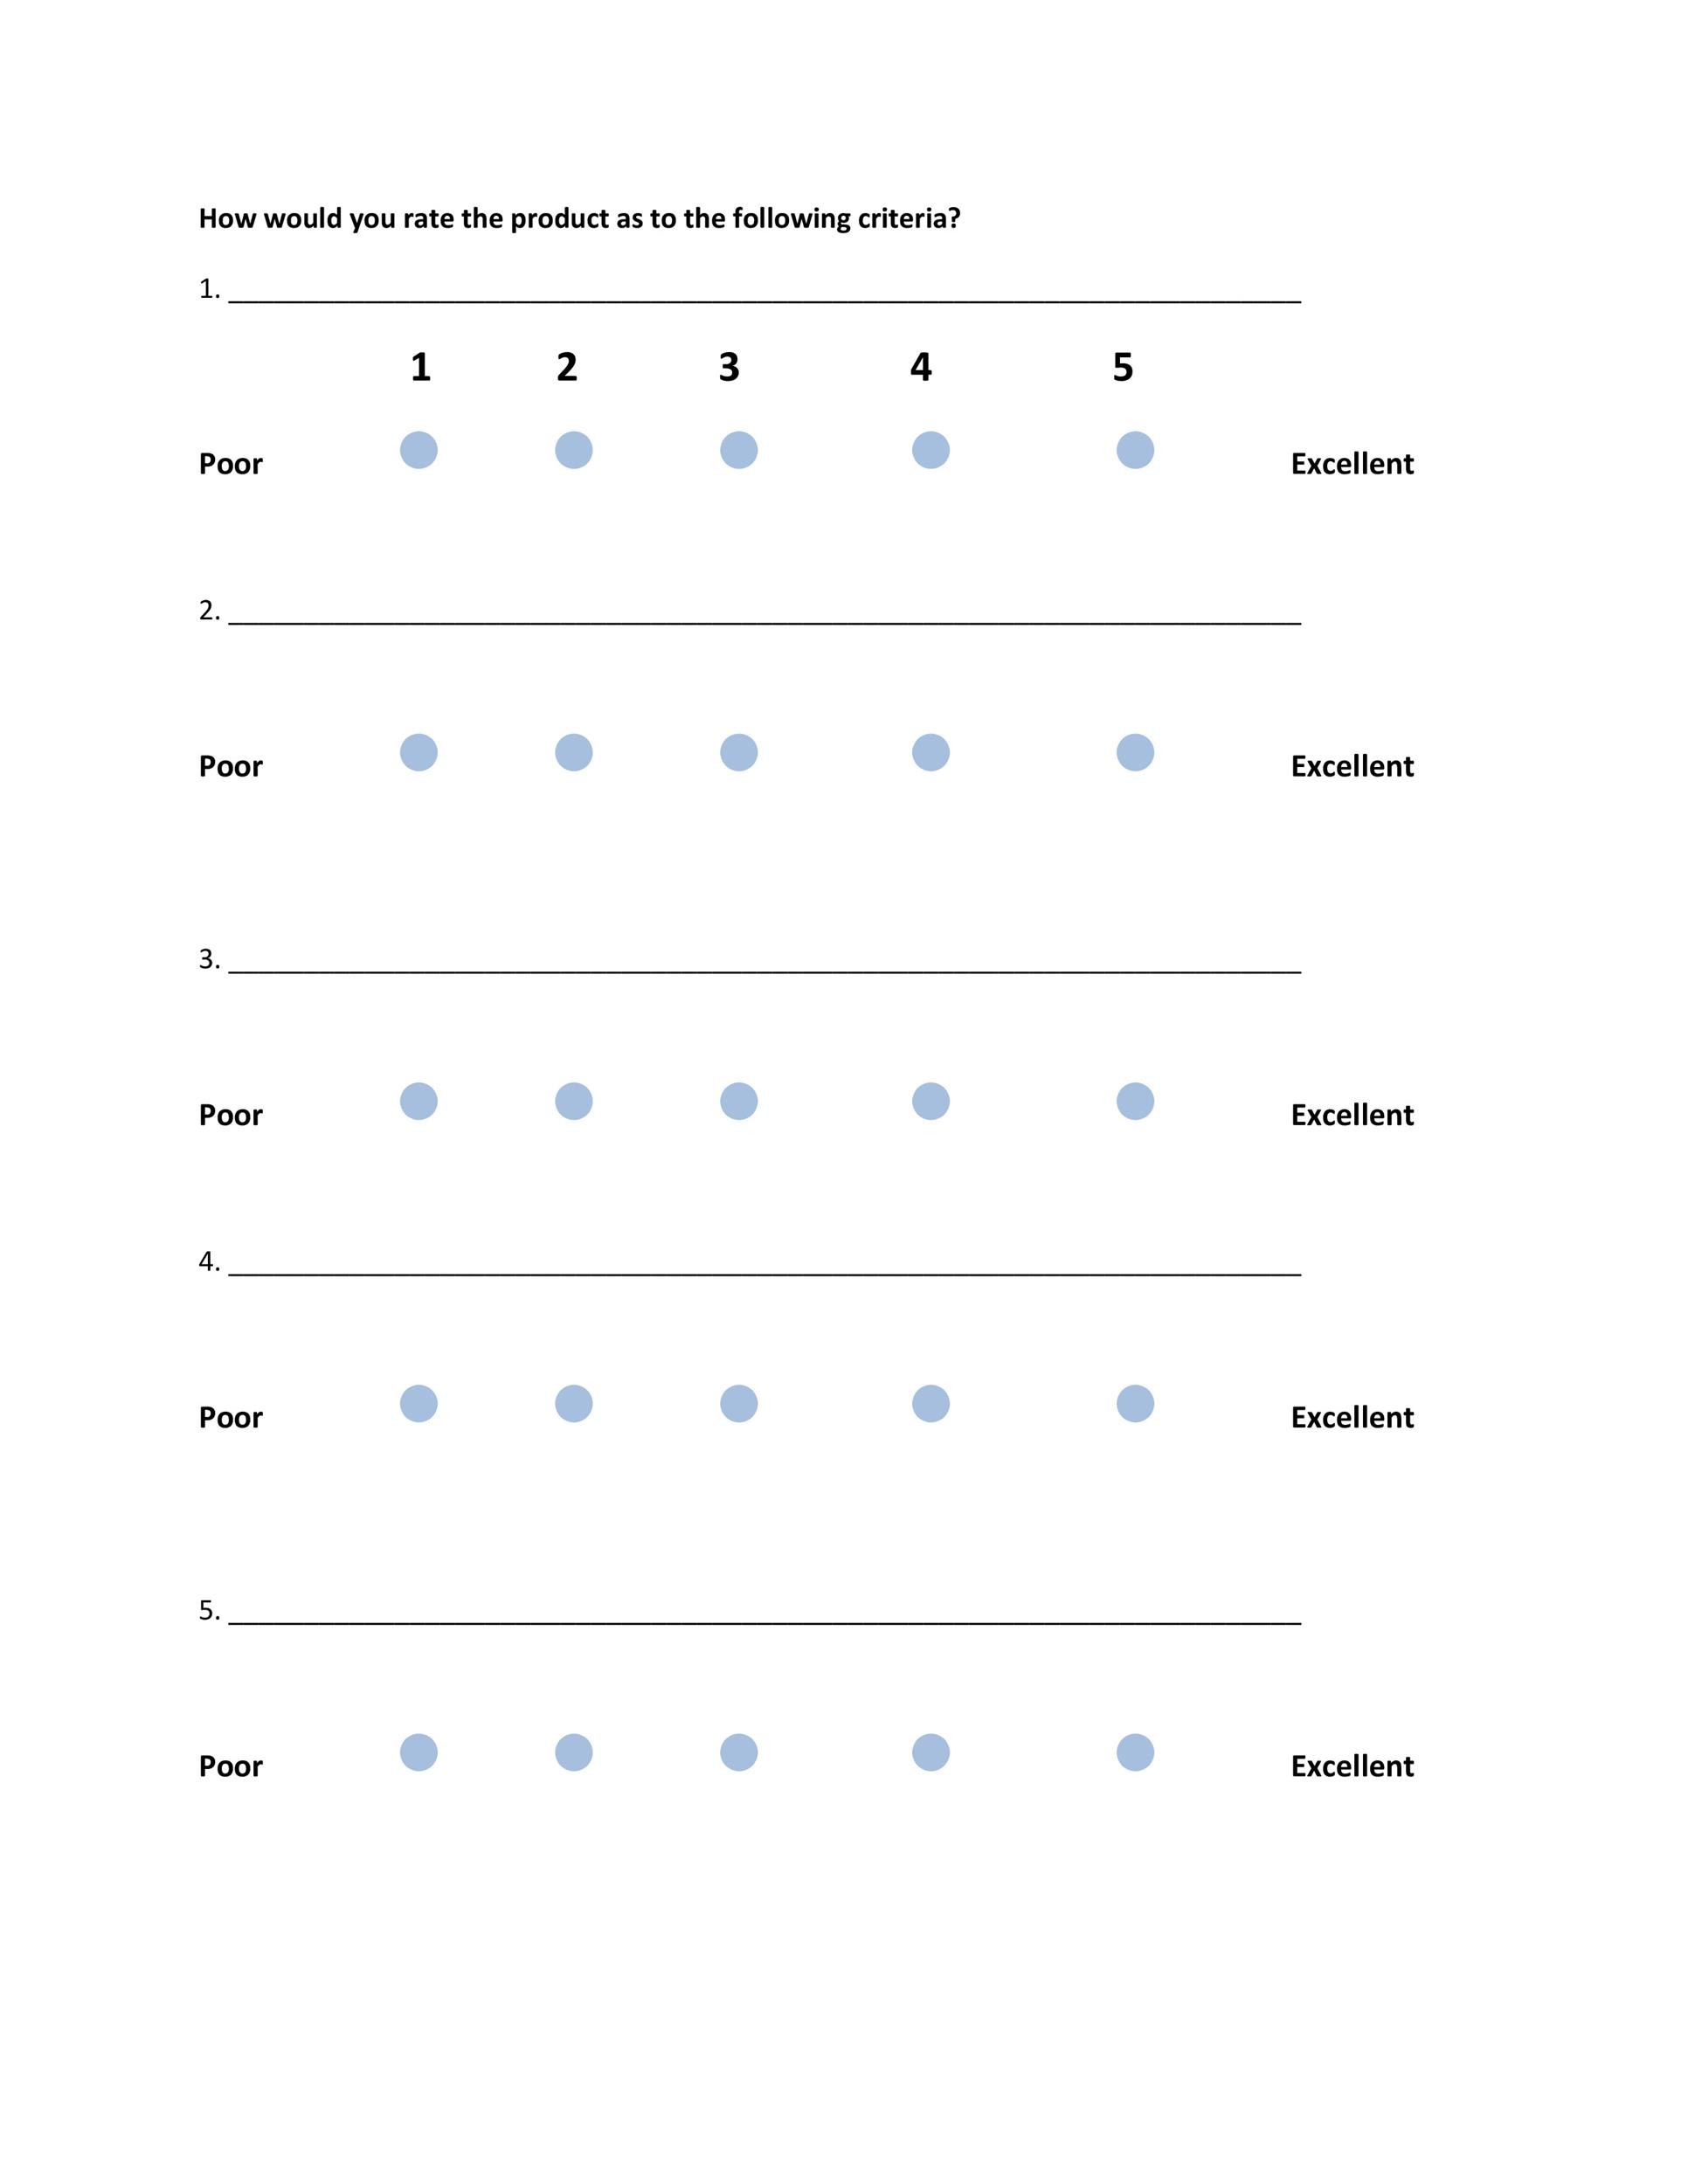 30 Free Likert Scale Templates Examples ᐅ TemplateLab